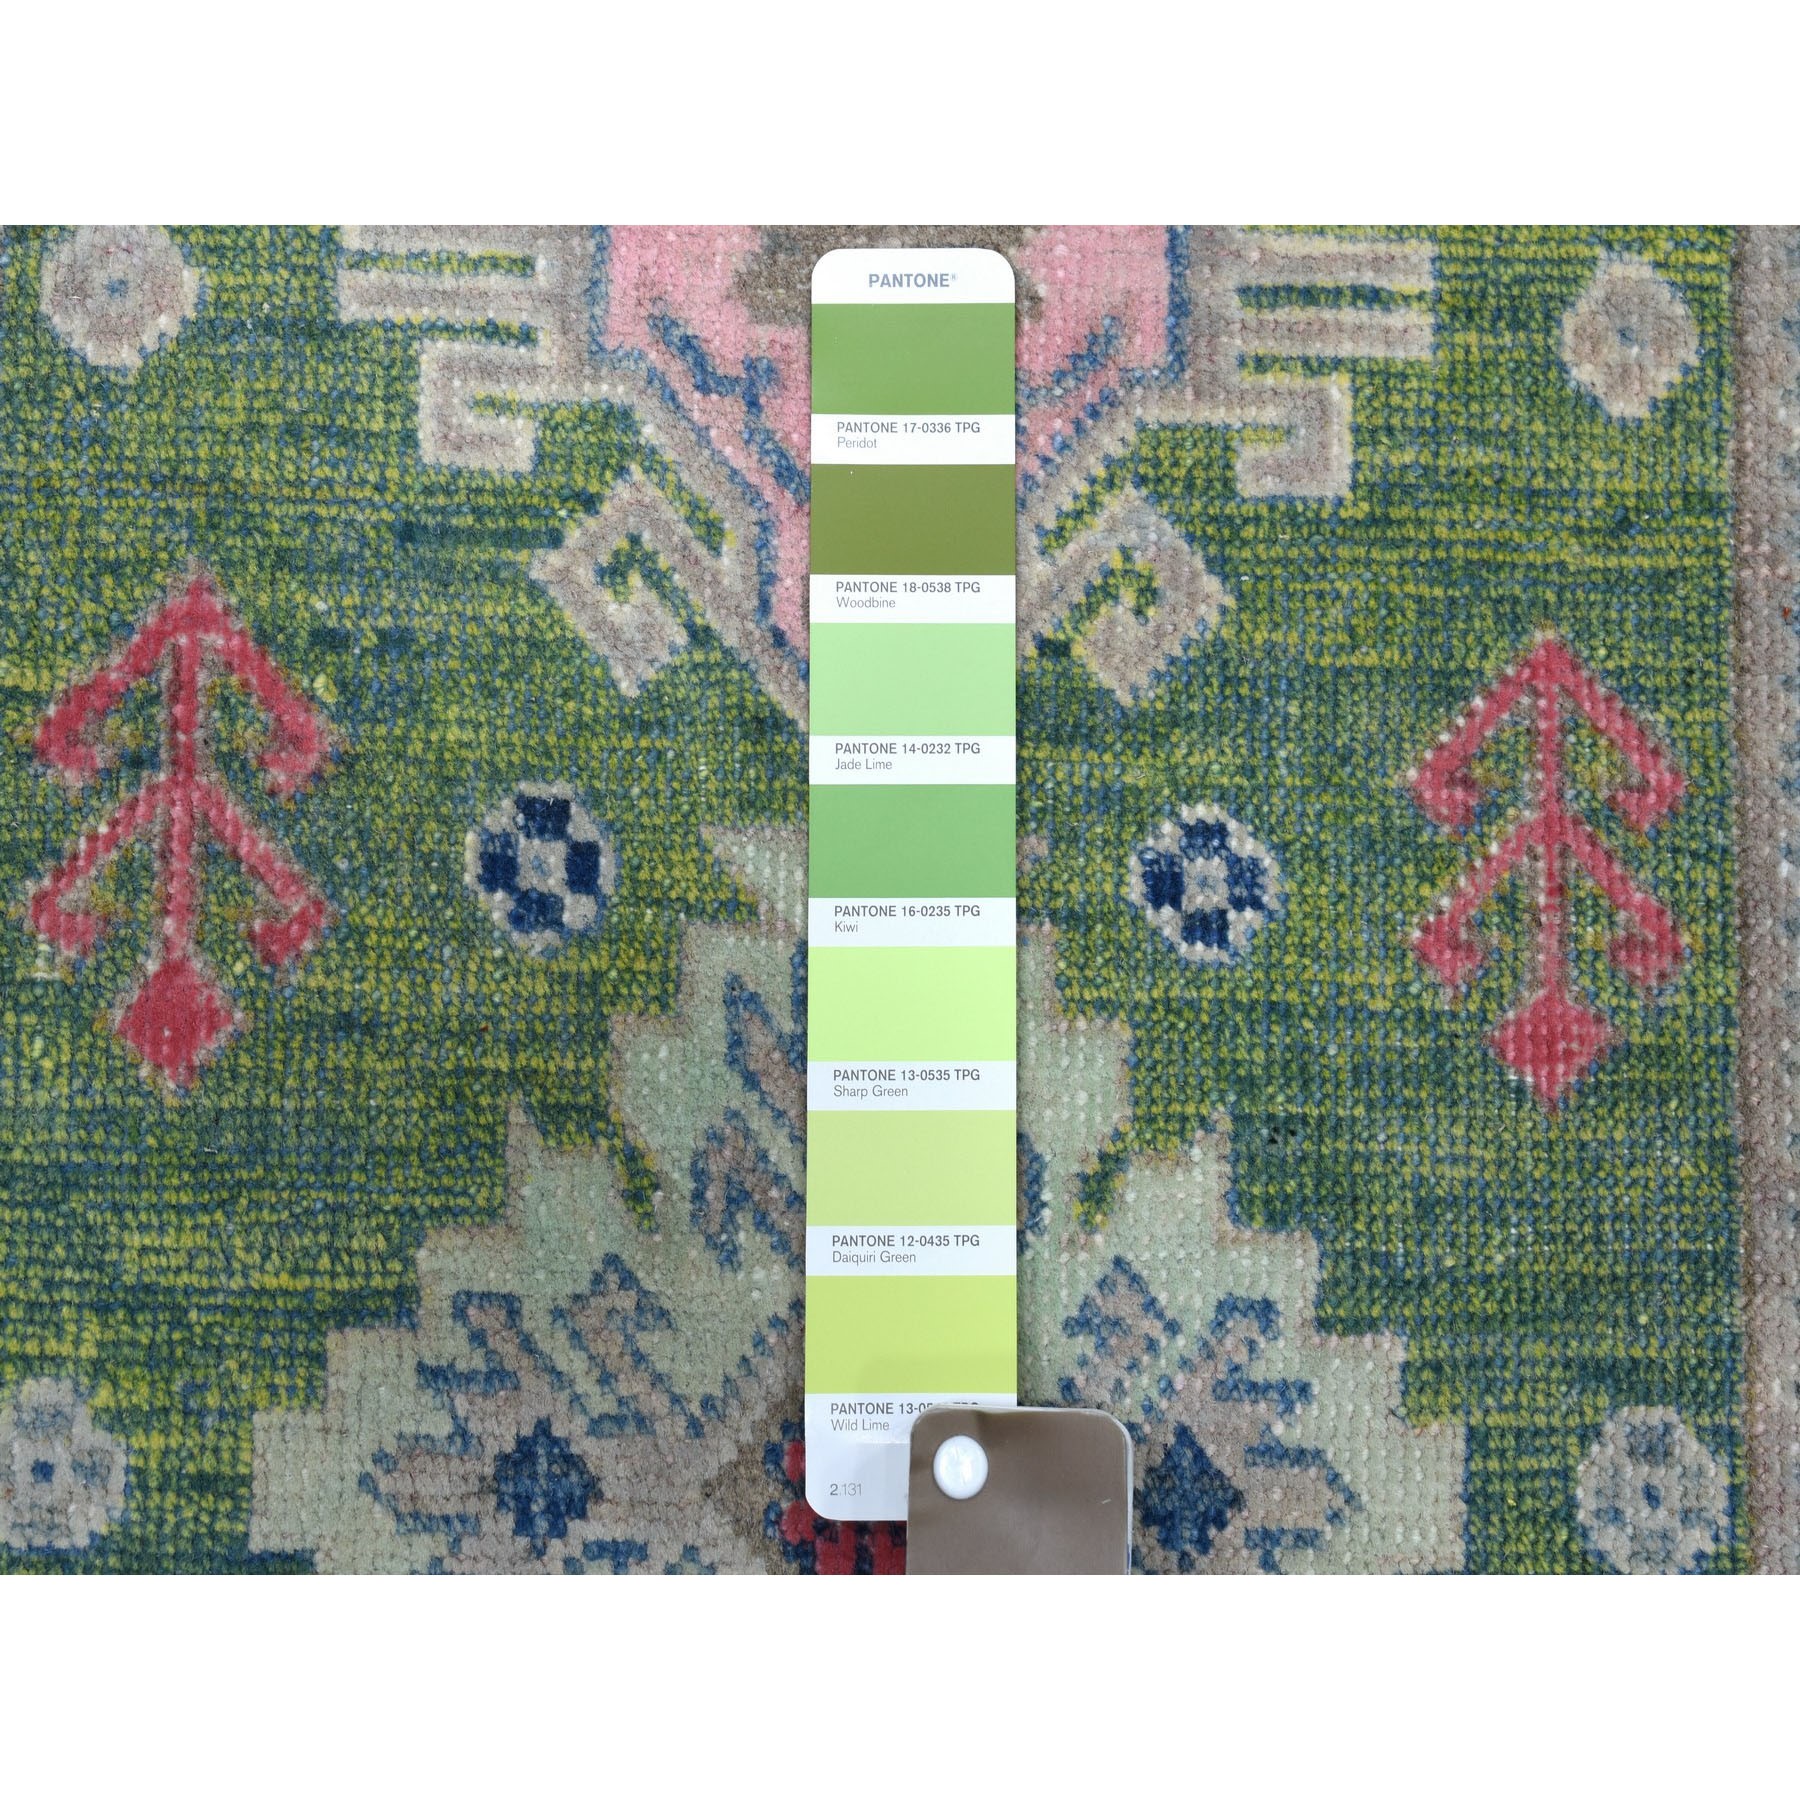 2-x3- Colorful Green Fusion Kazak Pure Wool Hand Knotted Oriental Rug 